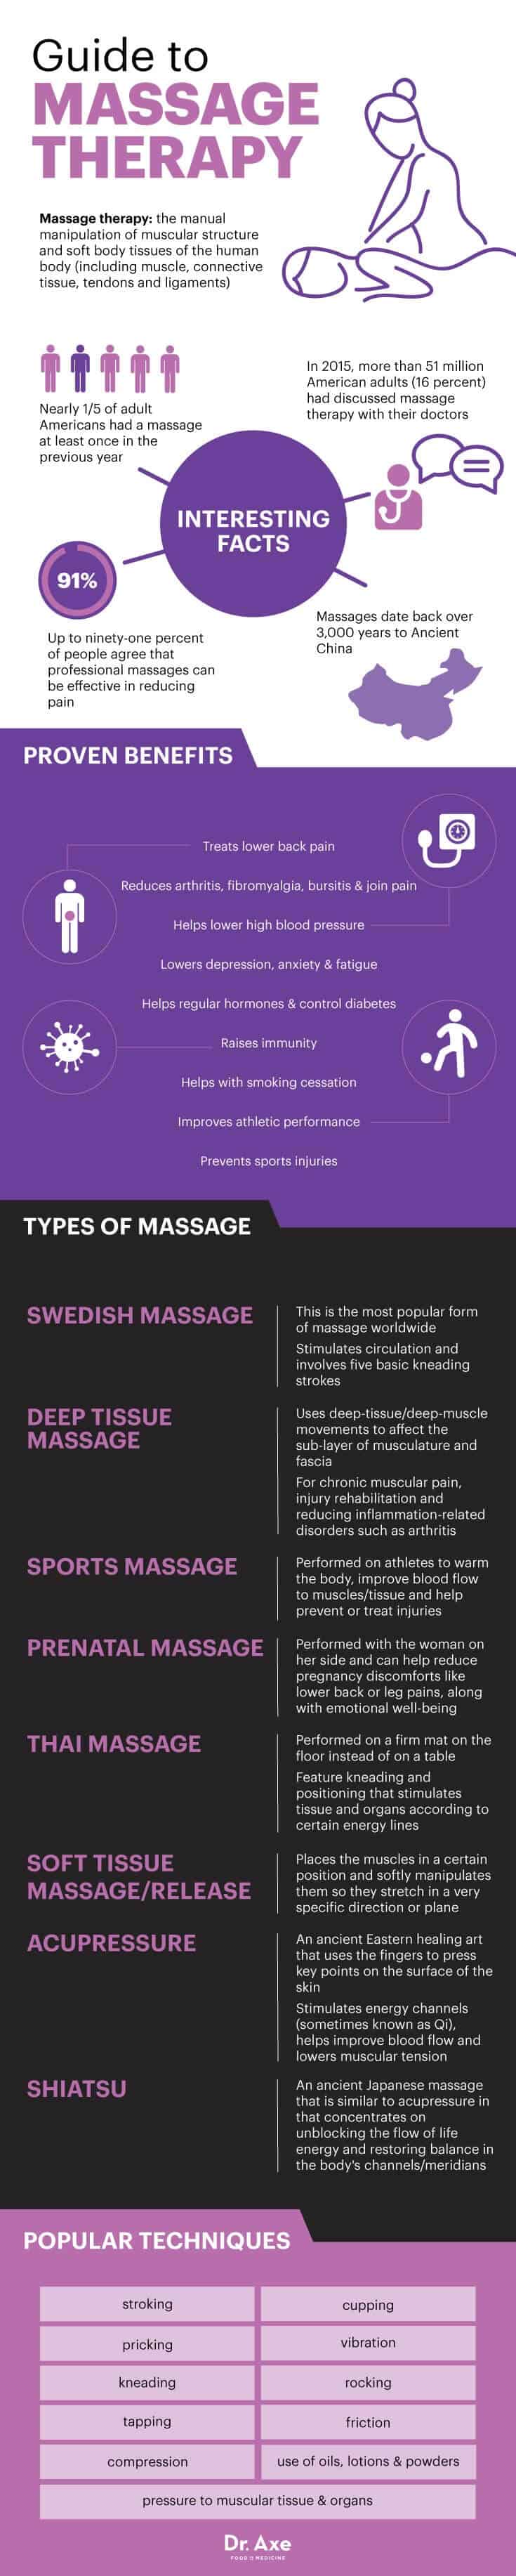 Massage Therapy Benefits Types And Techniques That Work Dr Axe